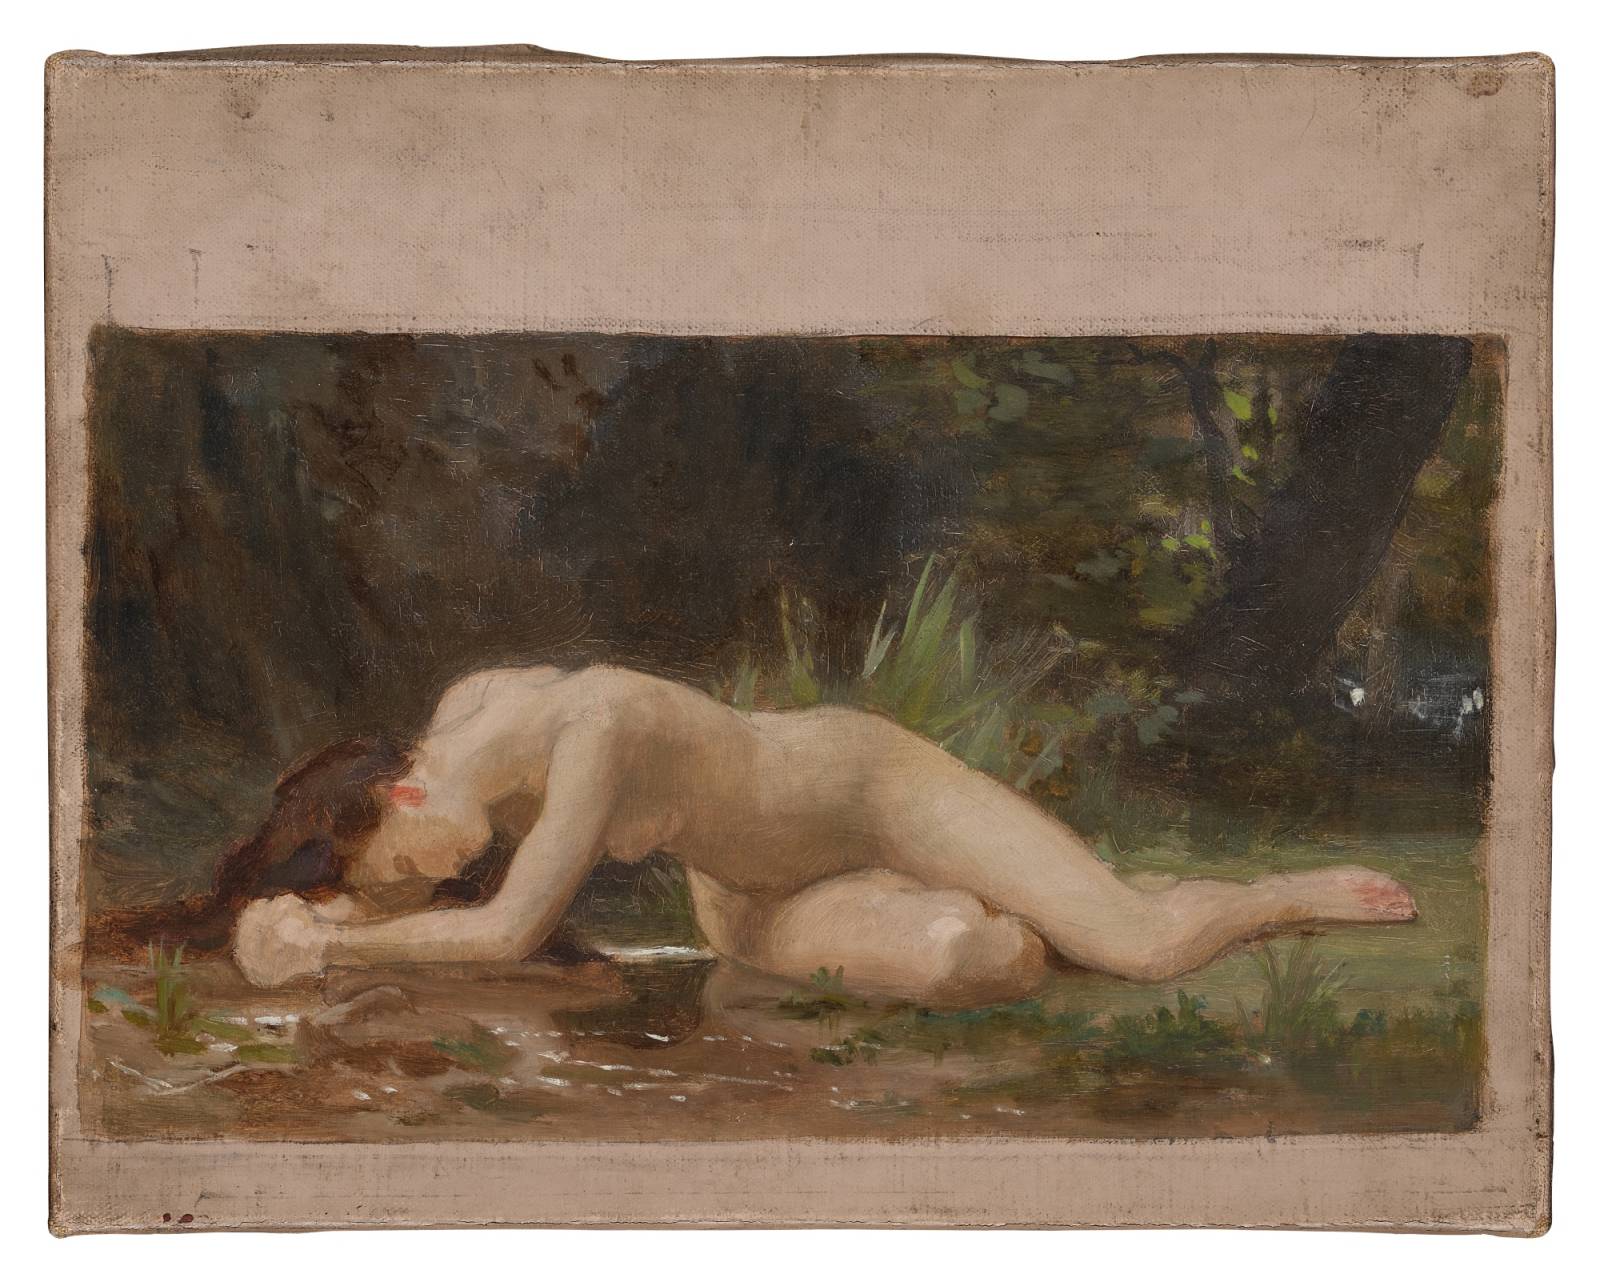 Bouguereau and his circle – Sotheby’s Auction highlights